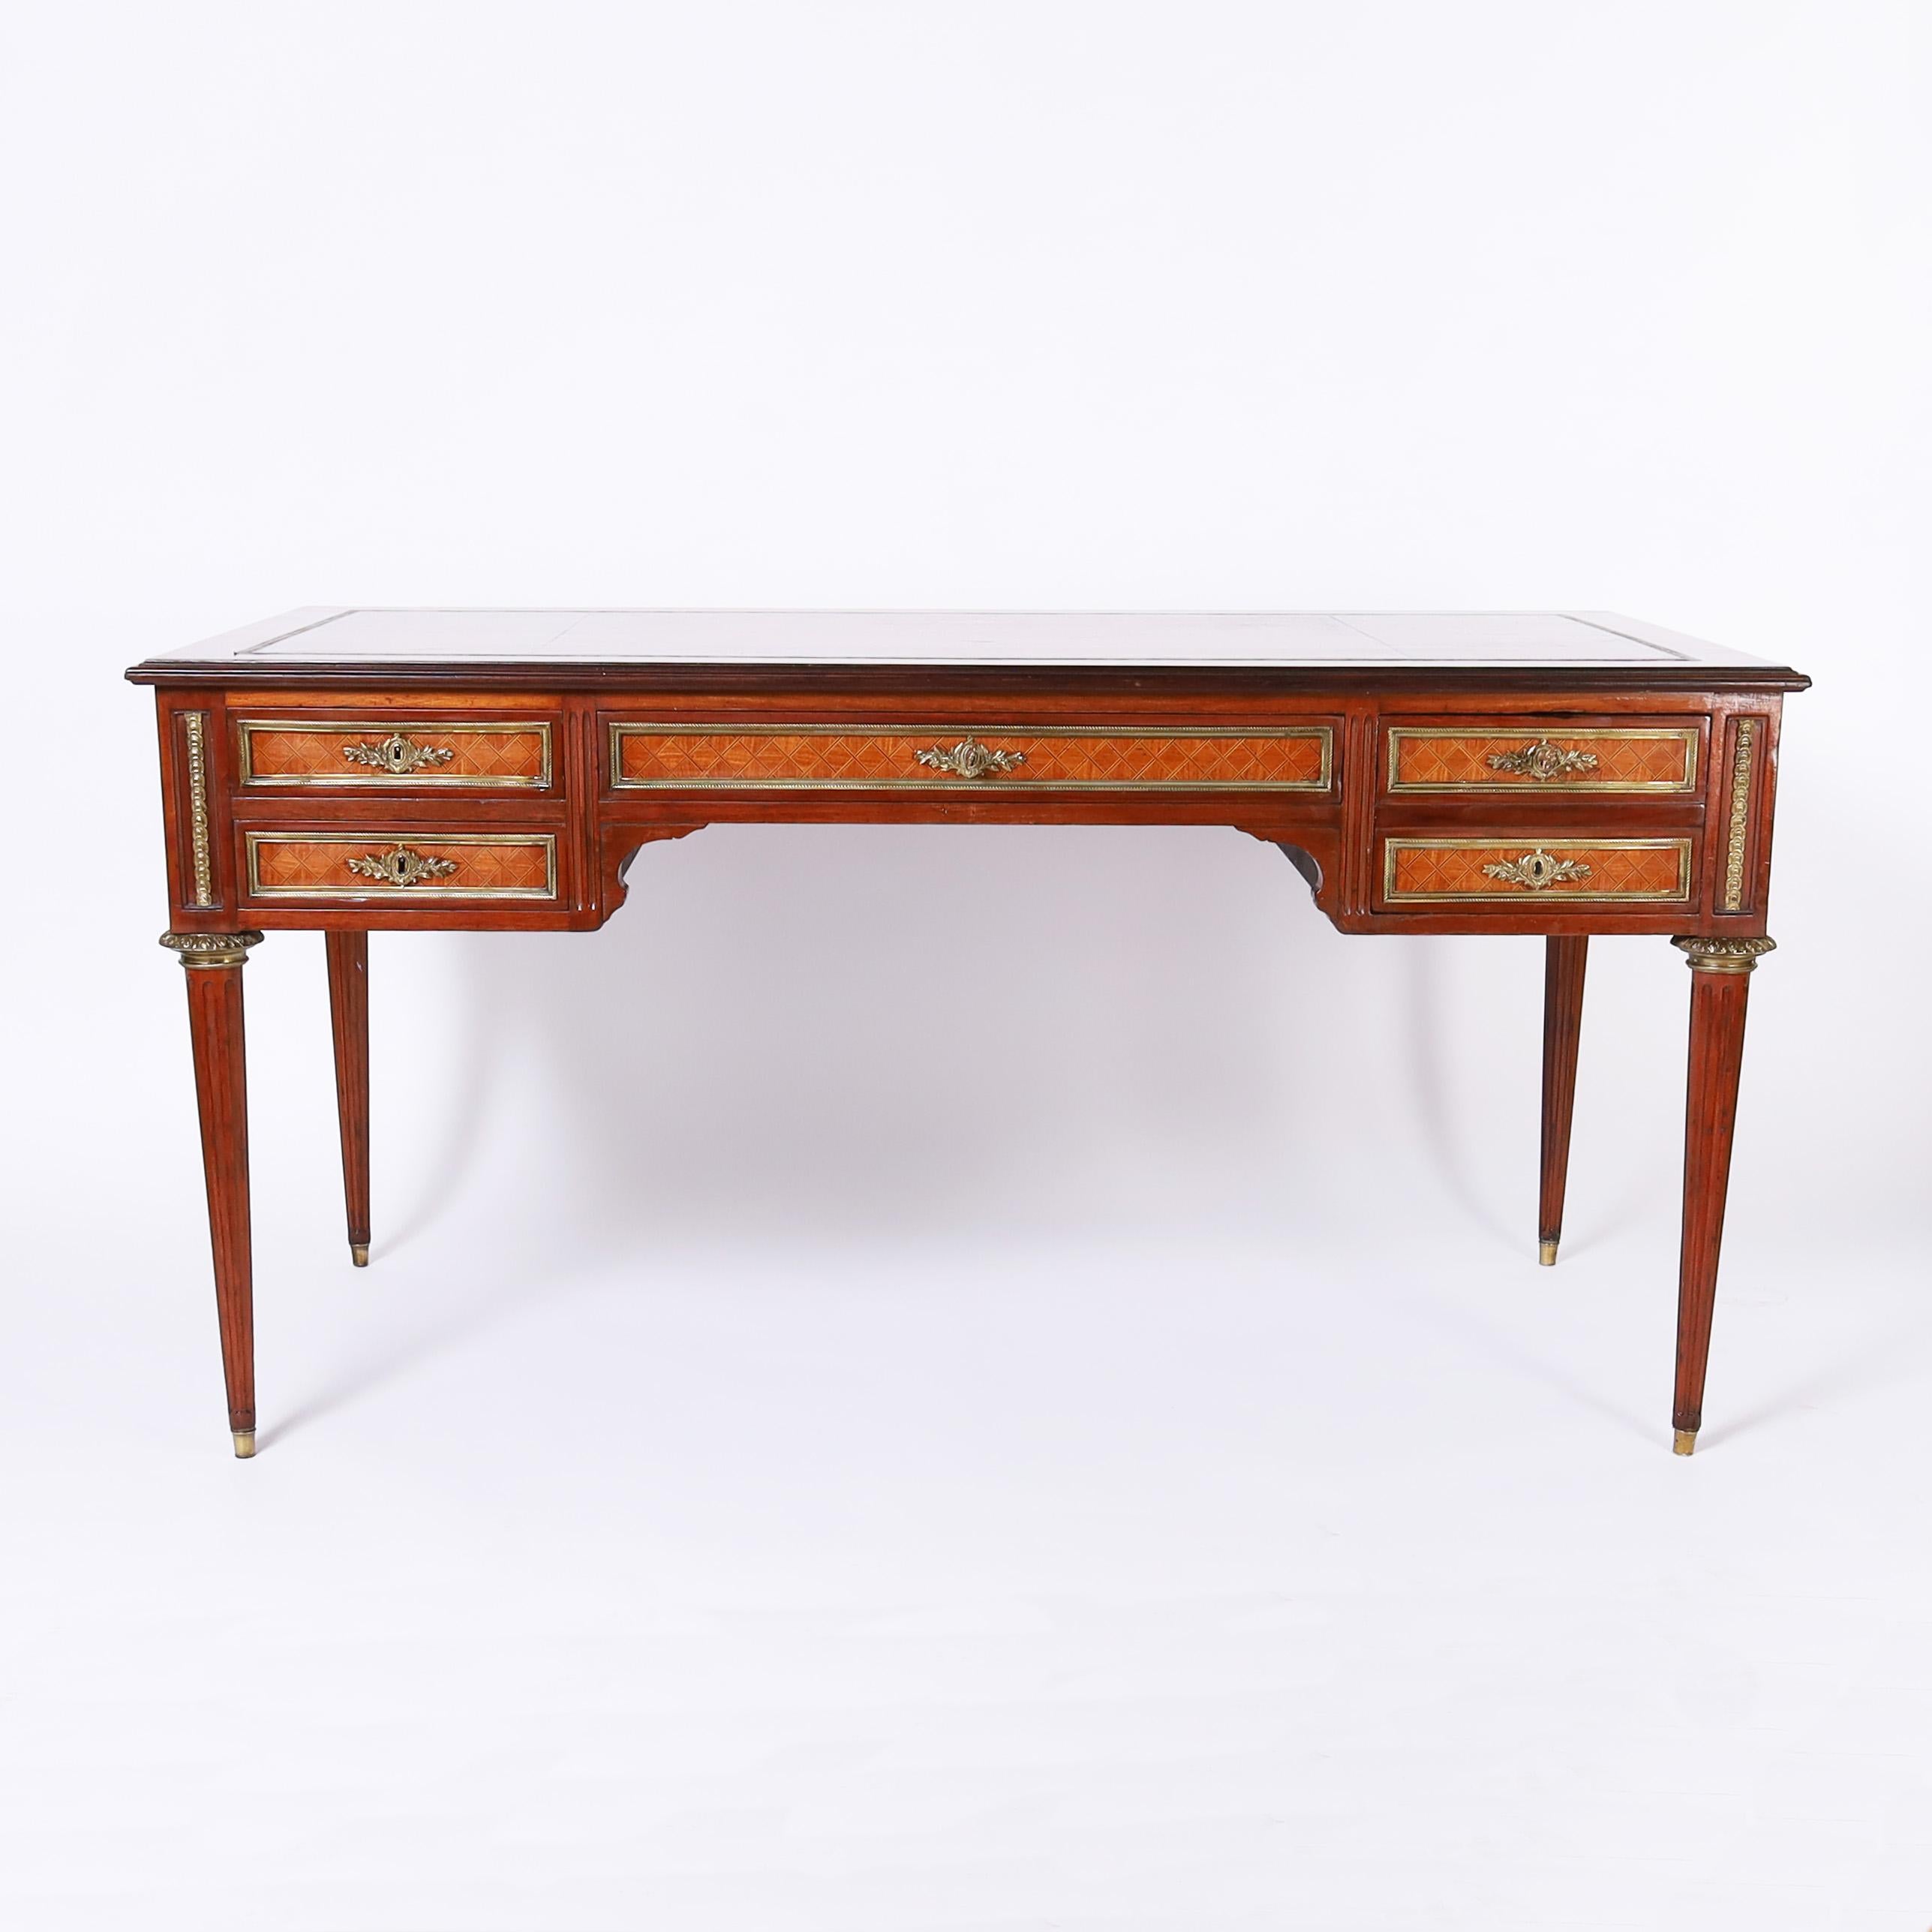 Refined 19th century Louis XVI style desk featuring the original tooled leather top on a case with three drawers in the front and the reverse of the desk with false drawers, geometric marquetry panels, bronze ormolu, a hidden compartment, working